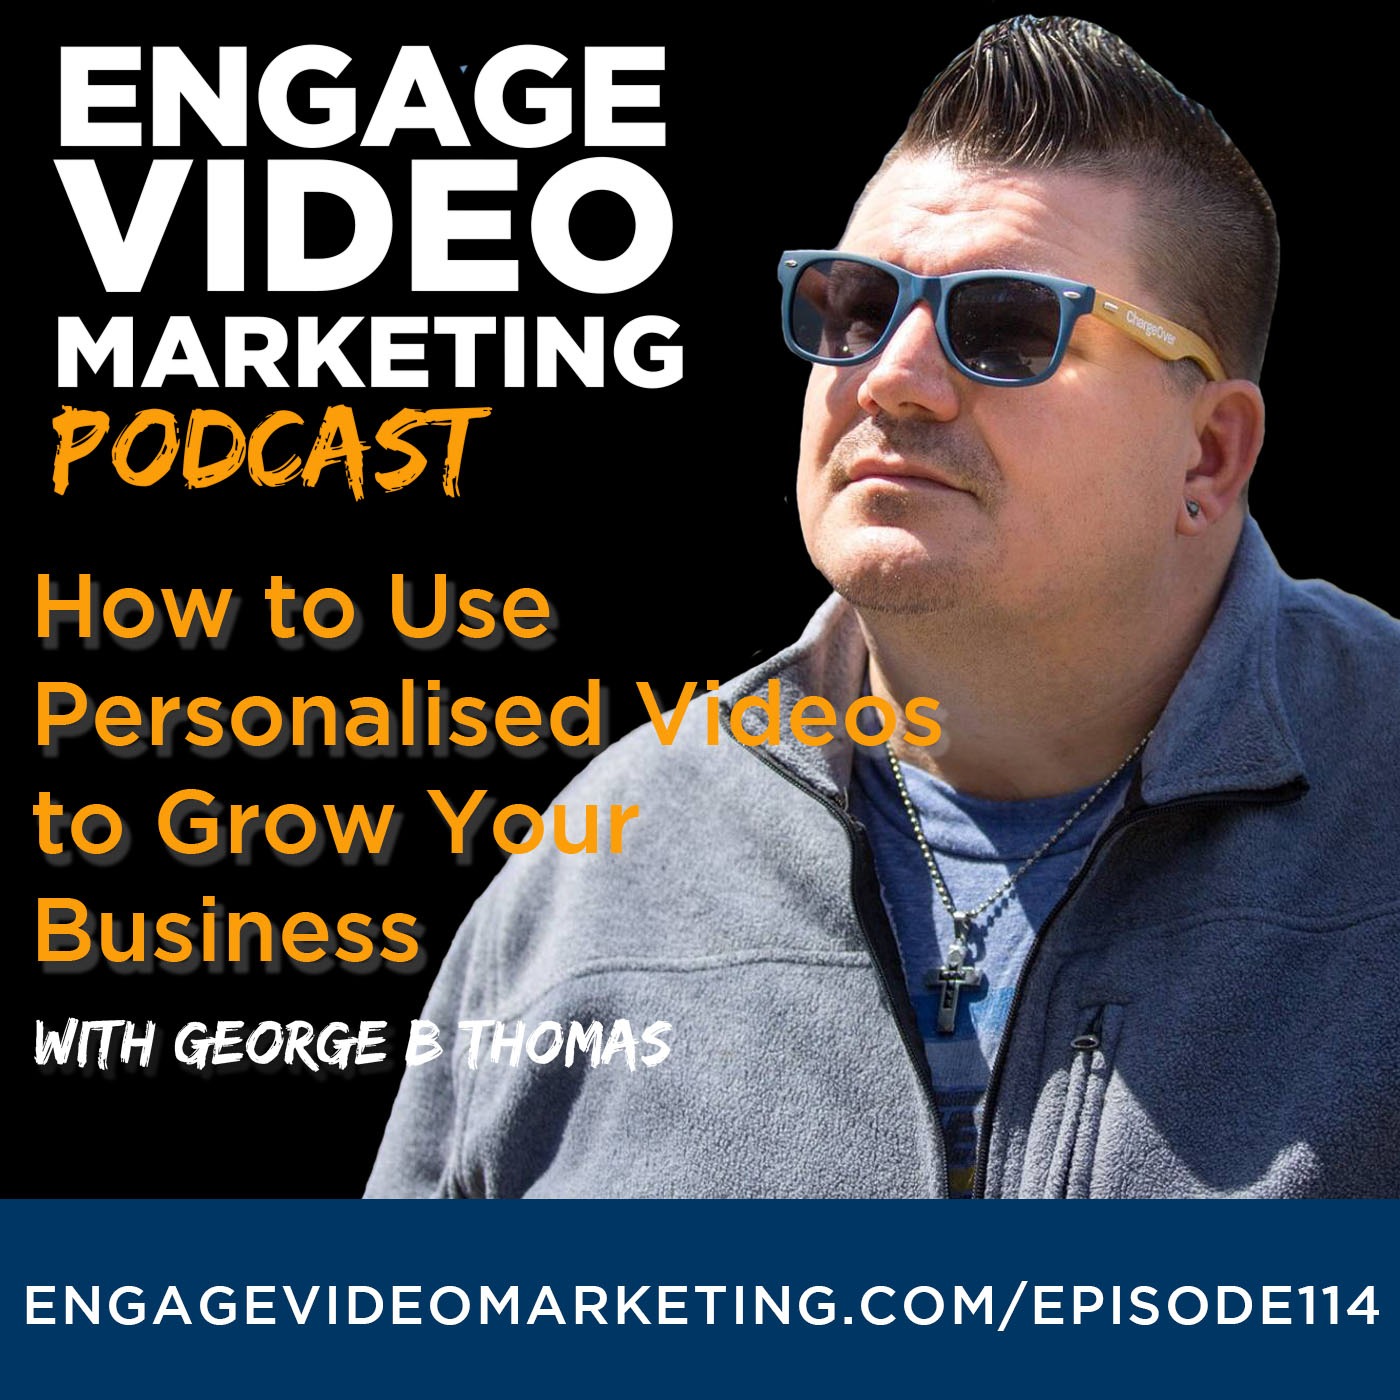 How to Use Personalised Video to Grow Your Business with George B Thomas